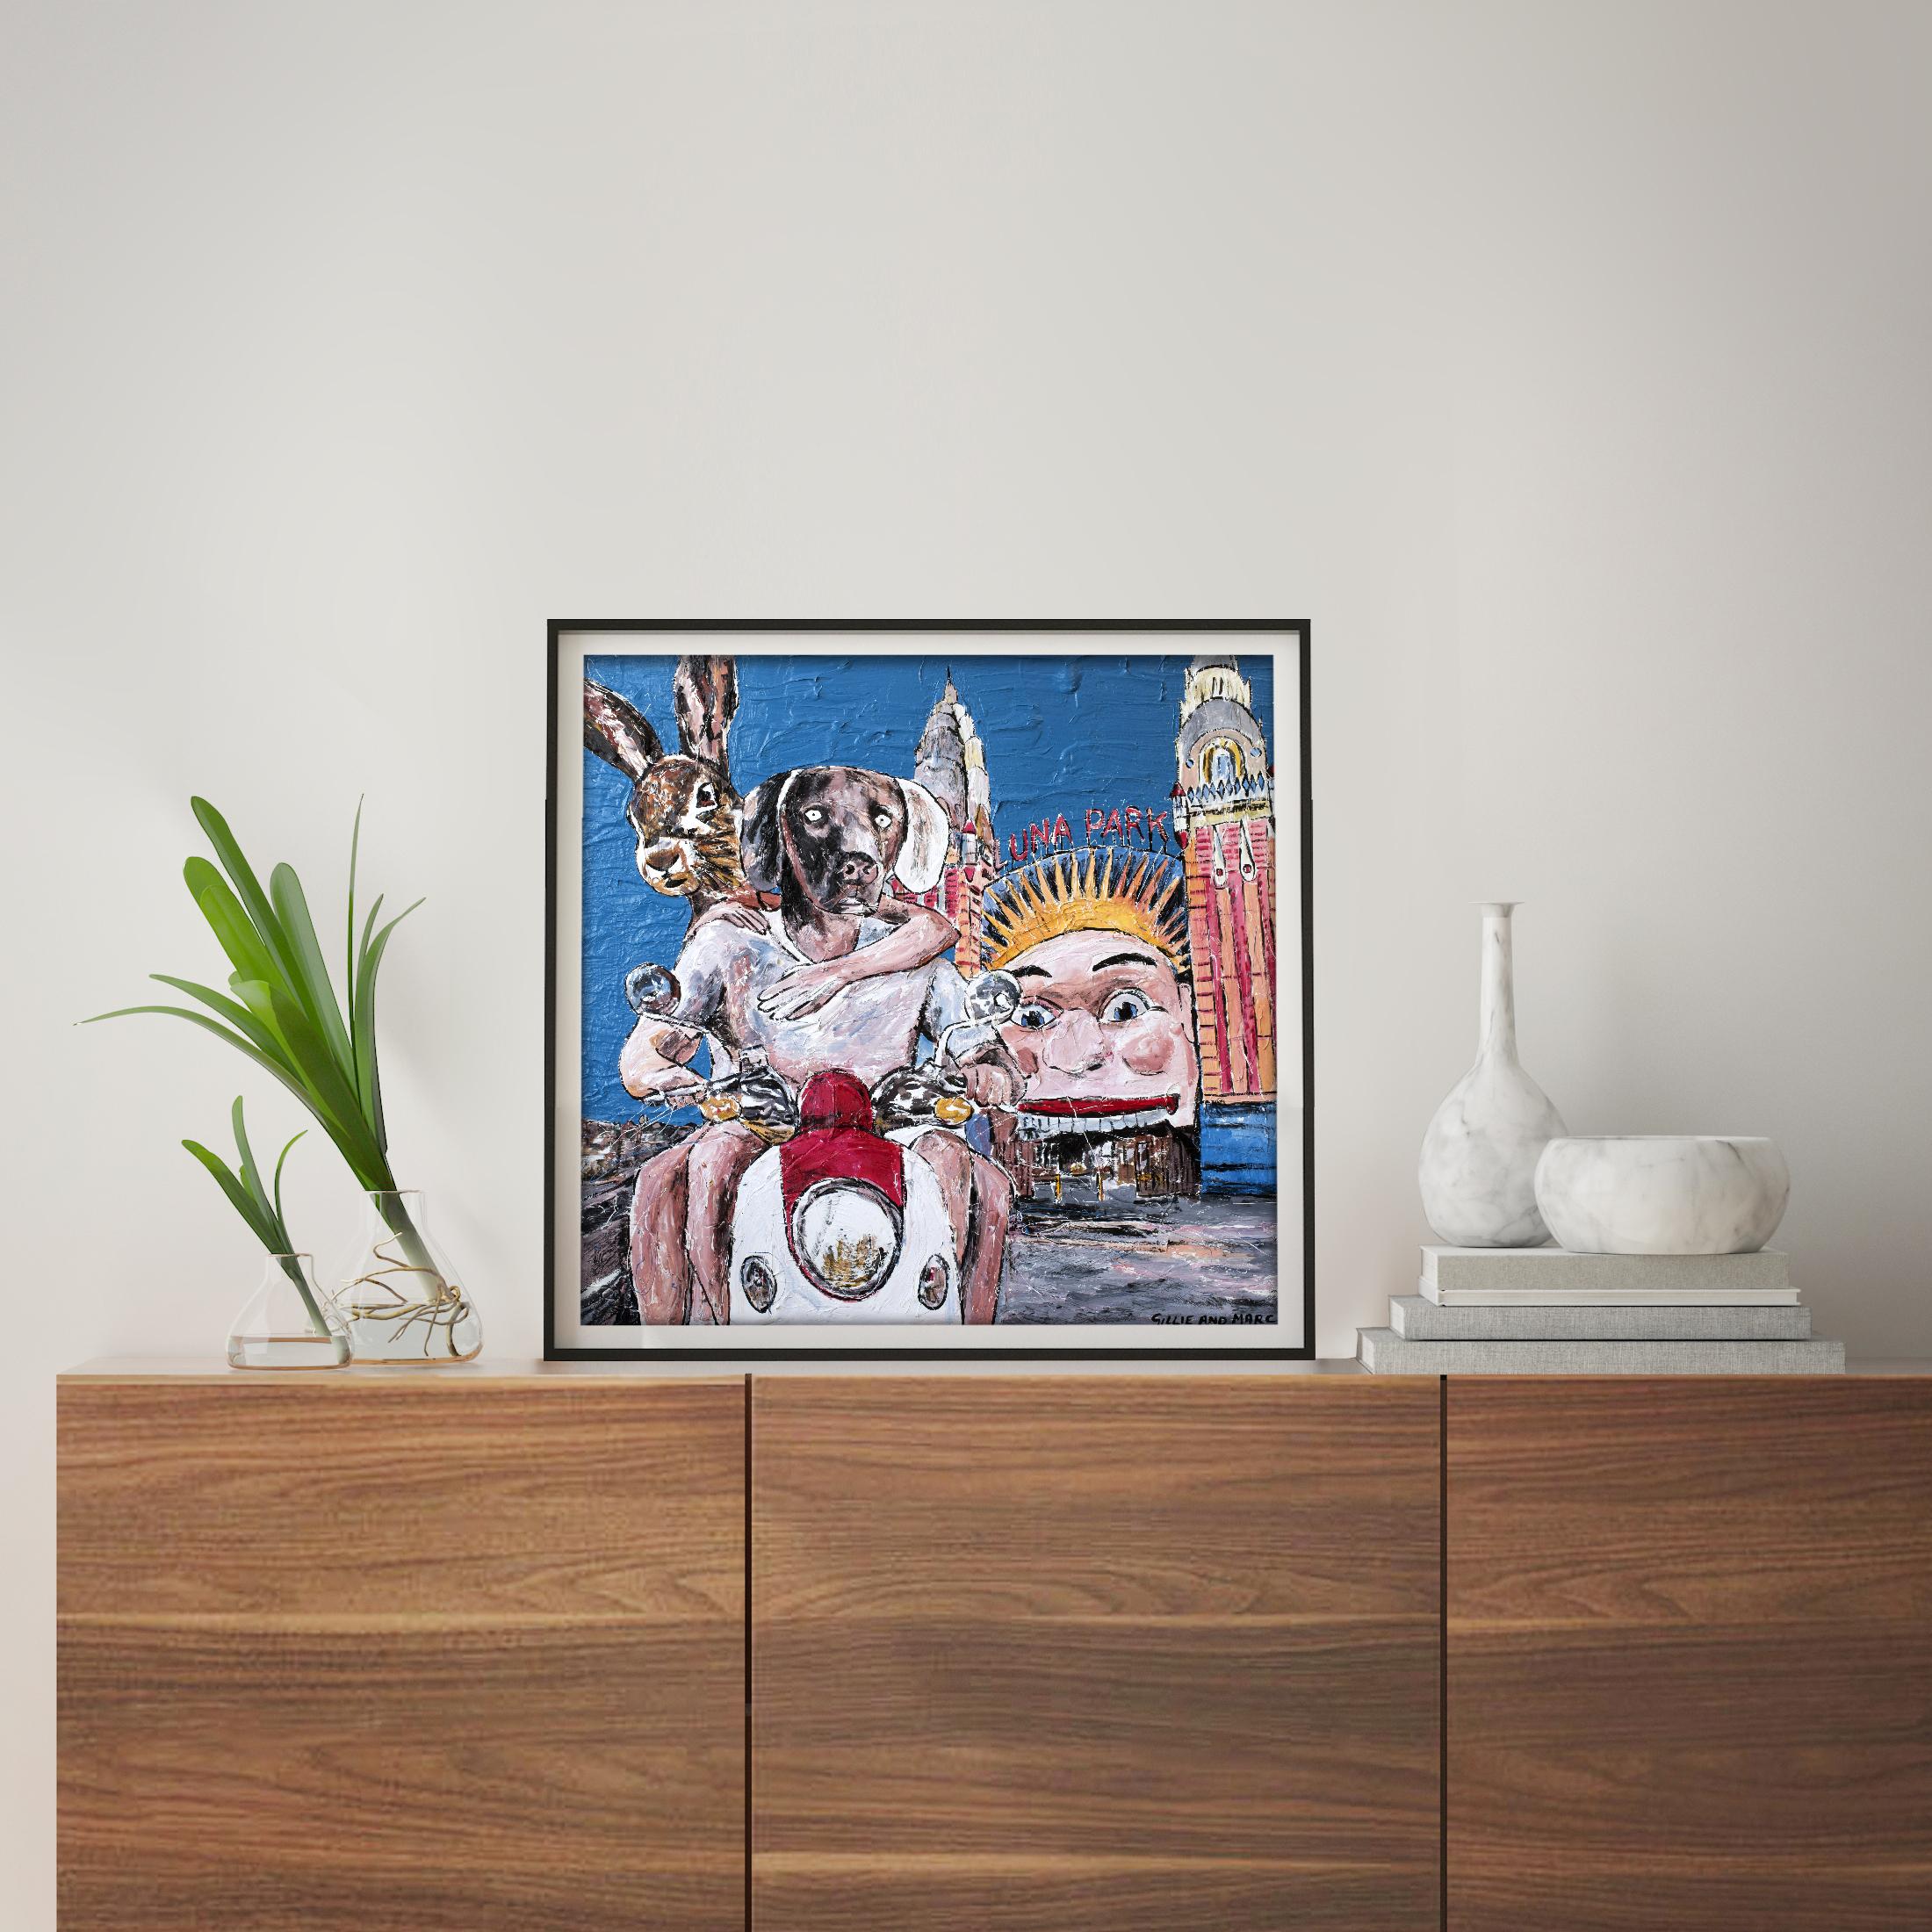 Animal Painting Print - Gillie and Marc - Limited Edition - Laugh - Sydney   - Gray Figurative Print by Gillie and Marc Schattner